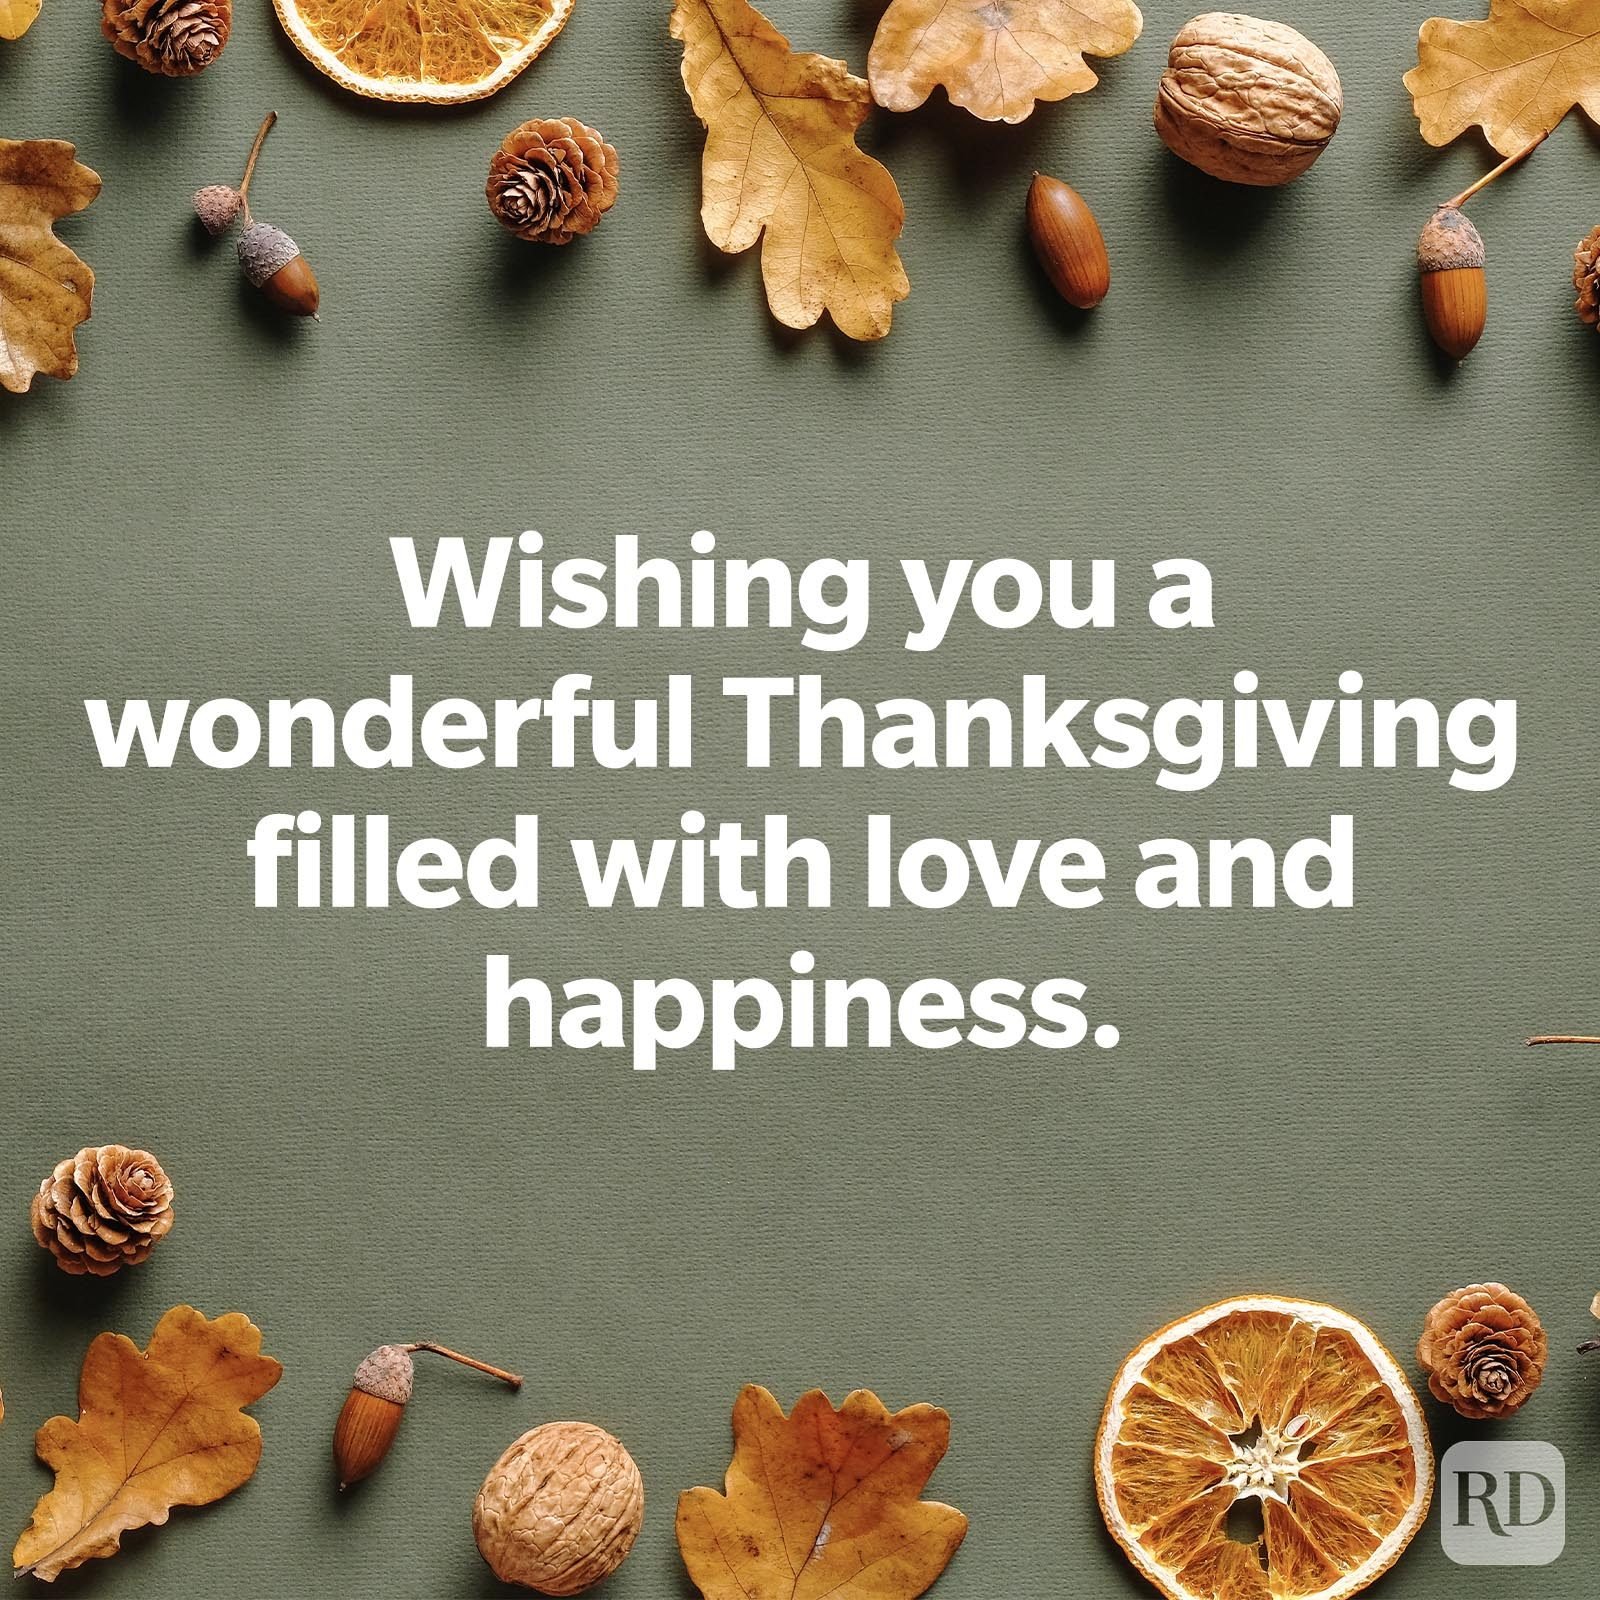 75 Thanksgiving Wishes to Share | Happy Thanksgiving Wishes for 2022